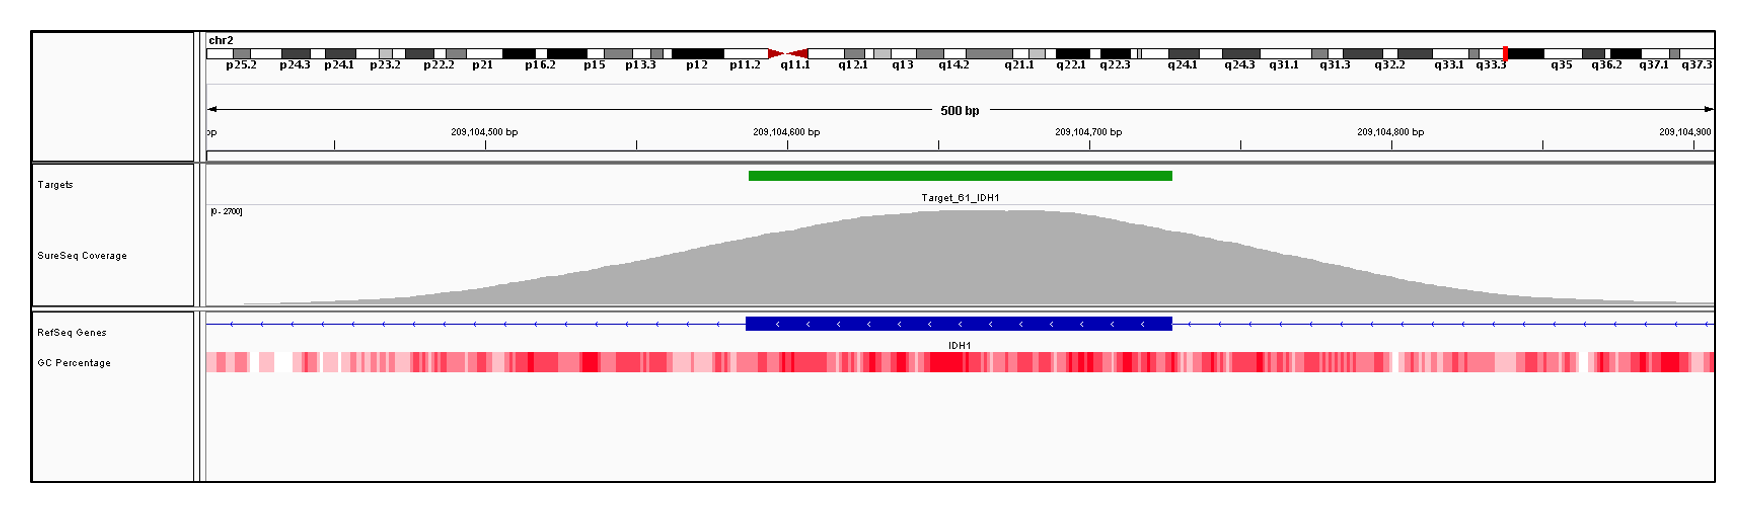 IDH1 Exon 8 (hg19 chr2:209104587-209104727). Depth of coverage per base (grey). Targeted region (green). Gene coding region as defined by RefSeq (blue). GC percentage (red). Image